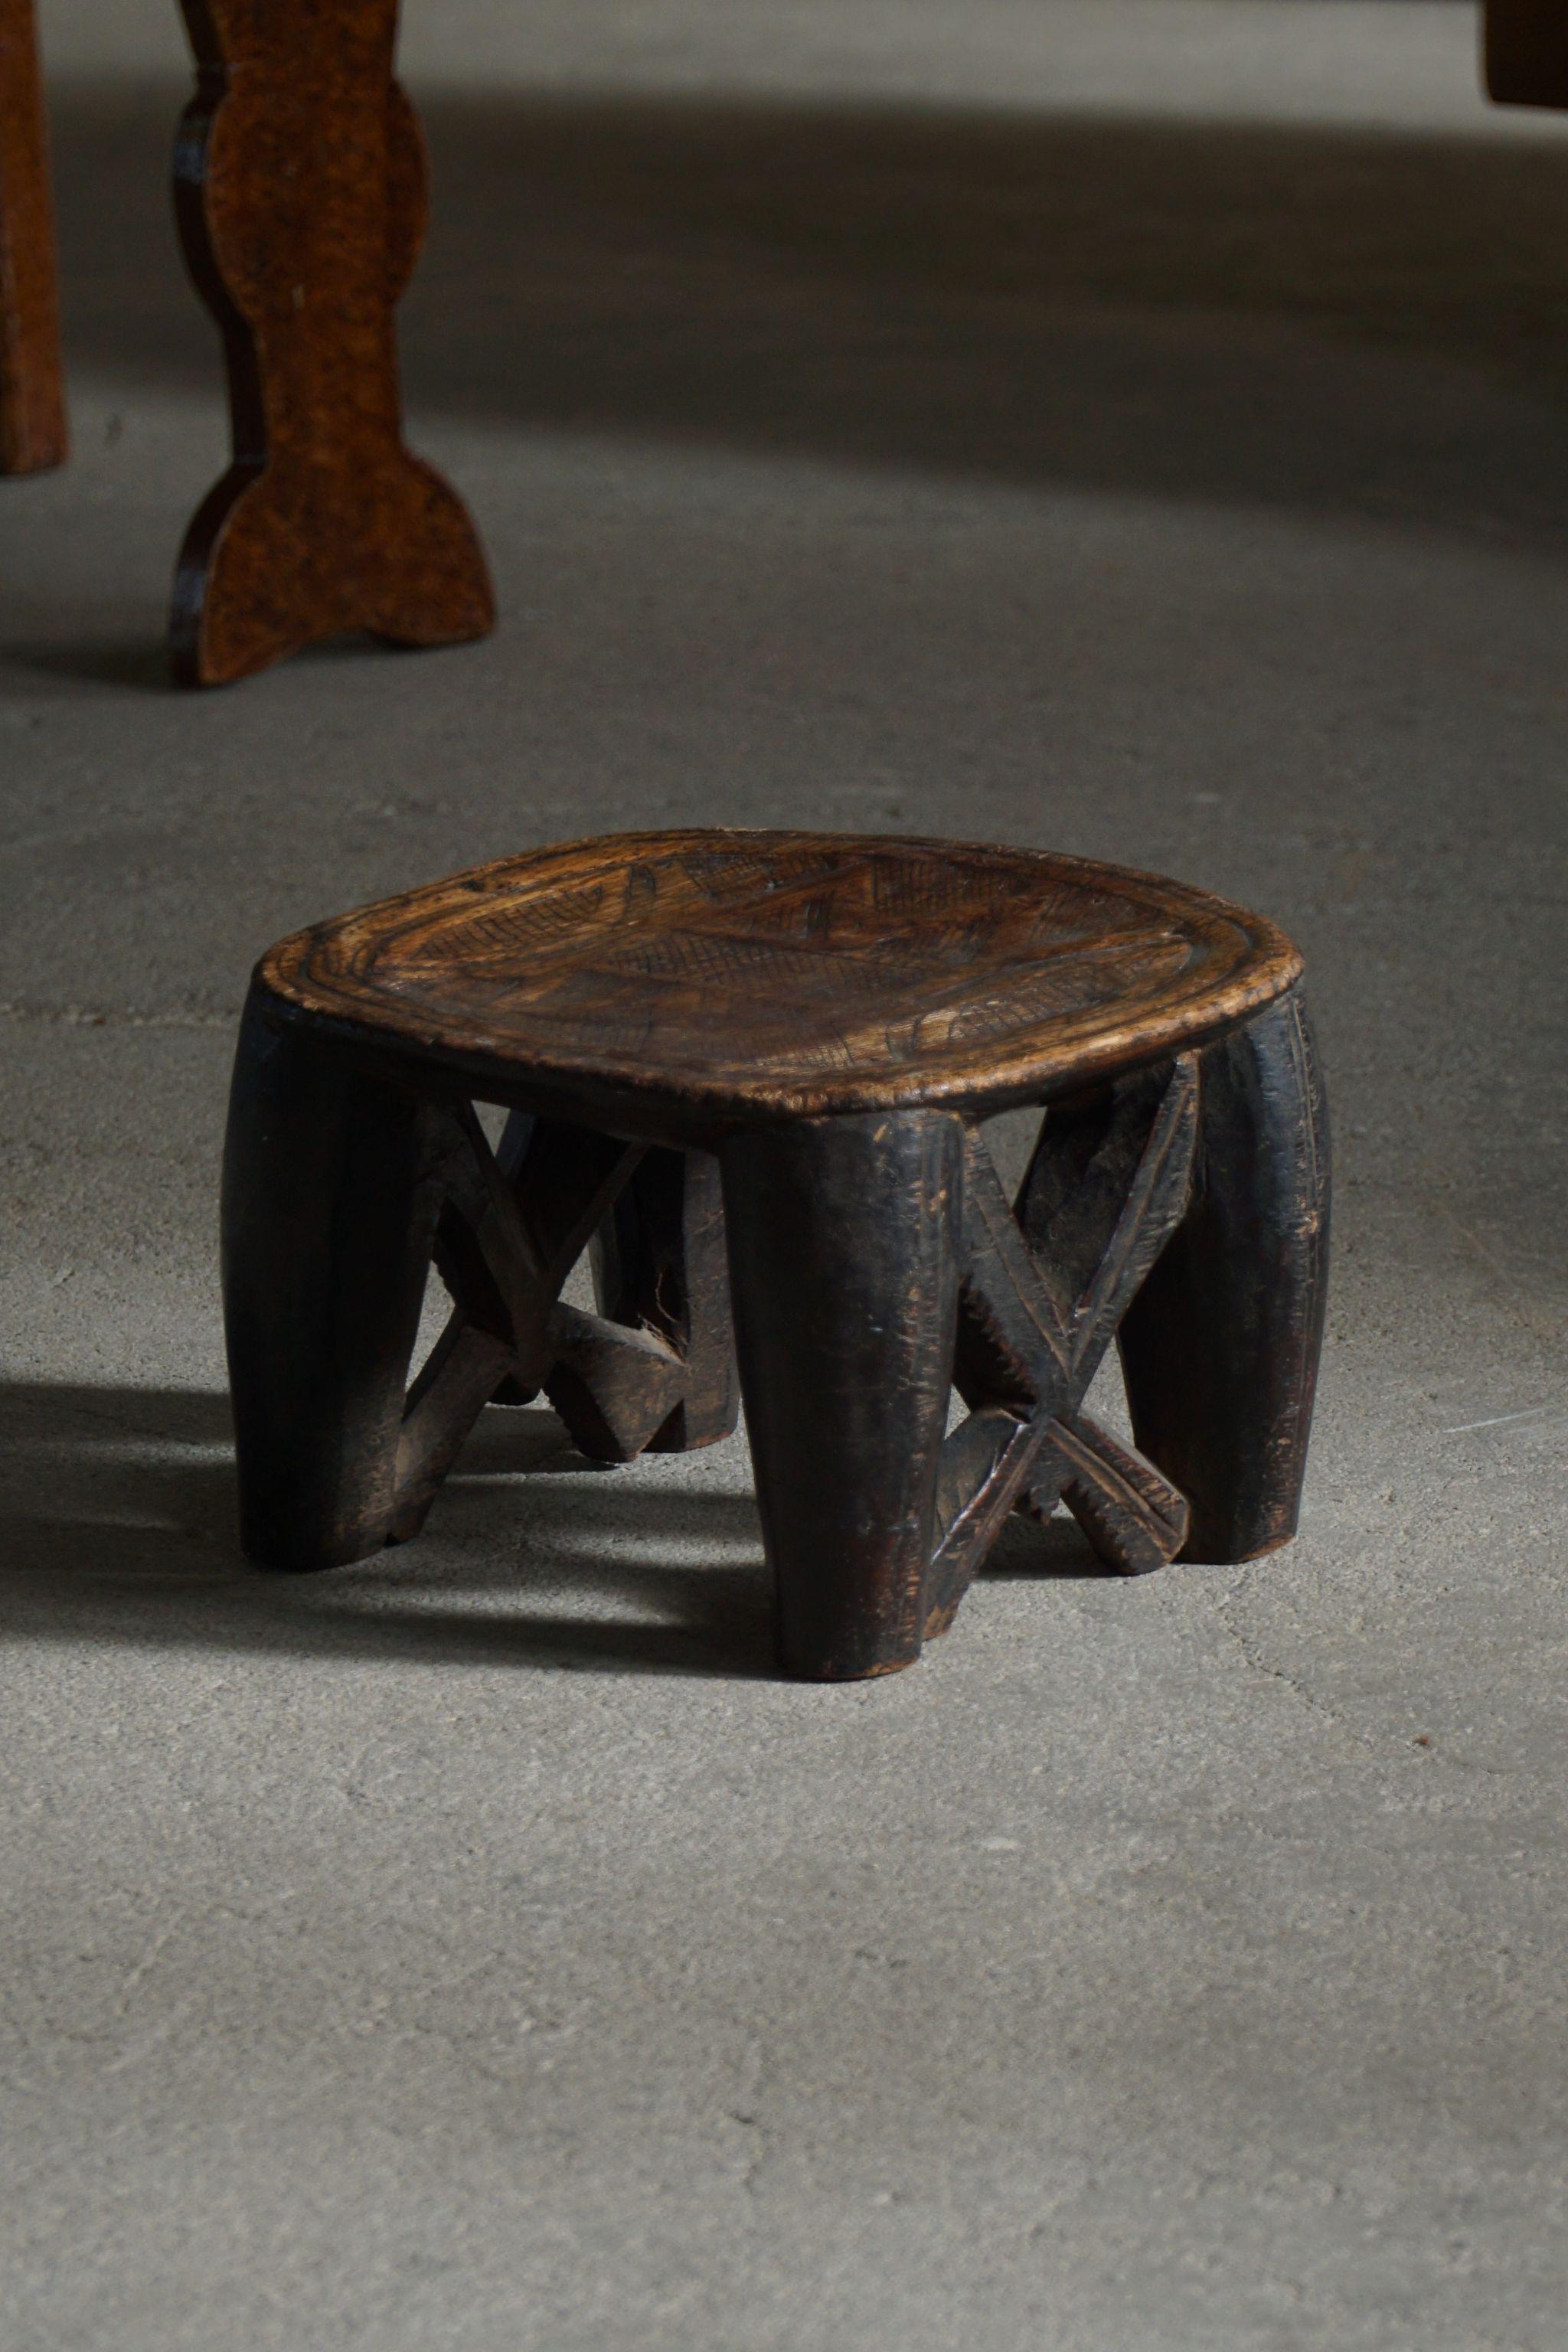 A marvellous hand carved wooden Nupe stool curated by the Nupe people who live alongside the Niger river in Nigeria. The stool would have been used as a prestige item used only for market days or during important meetings. A unique design making it